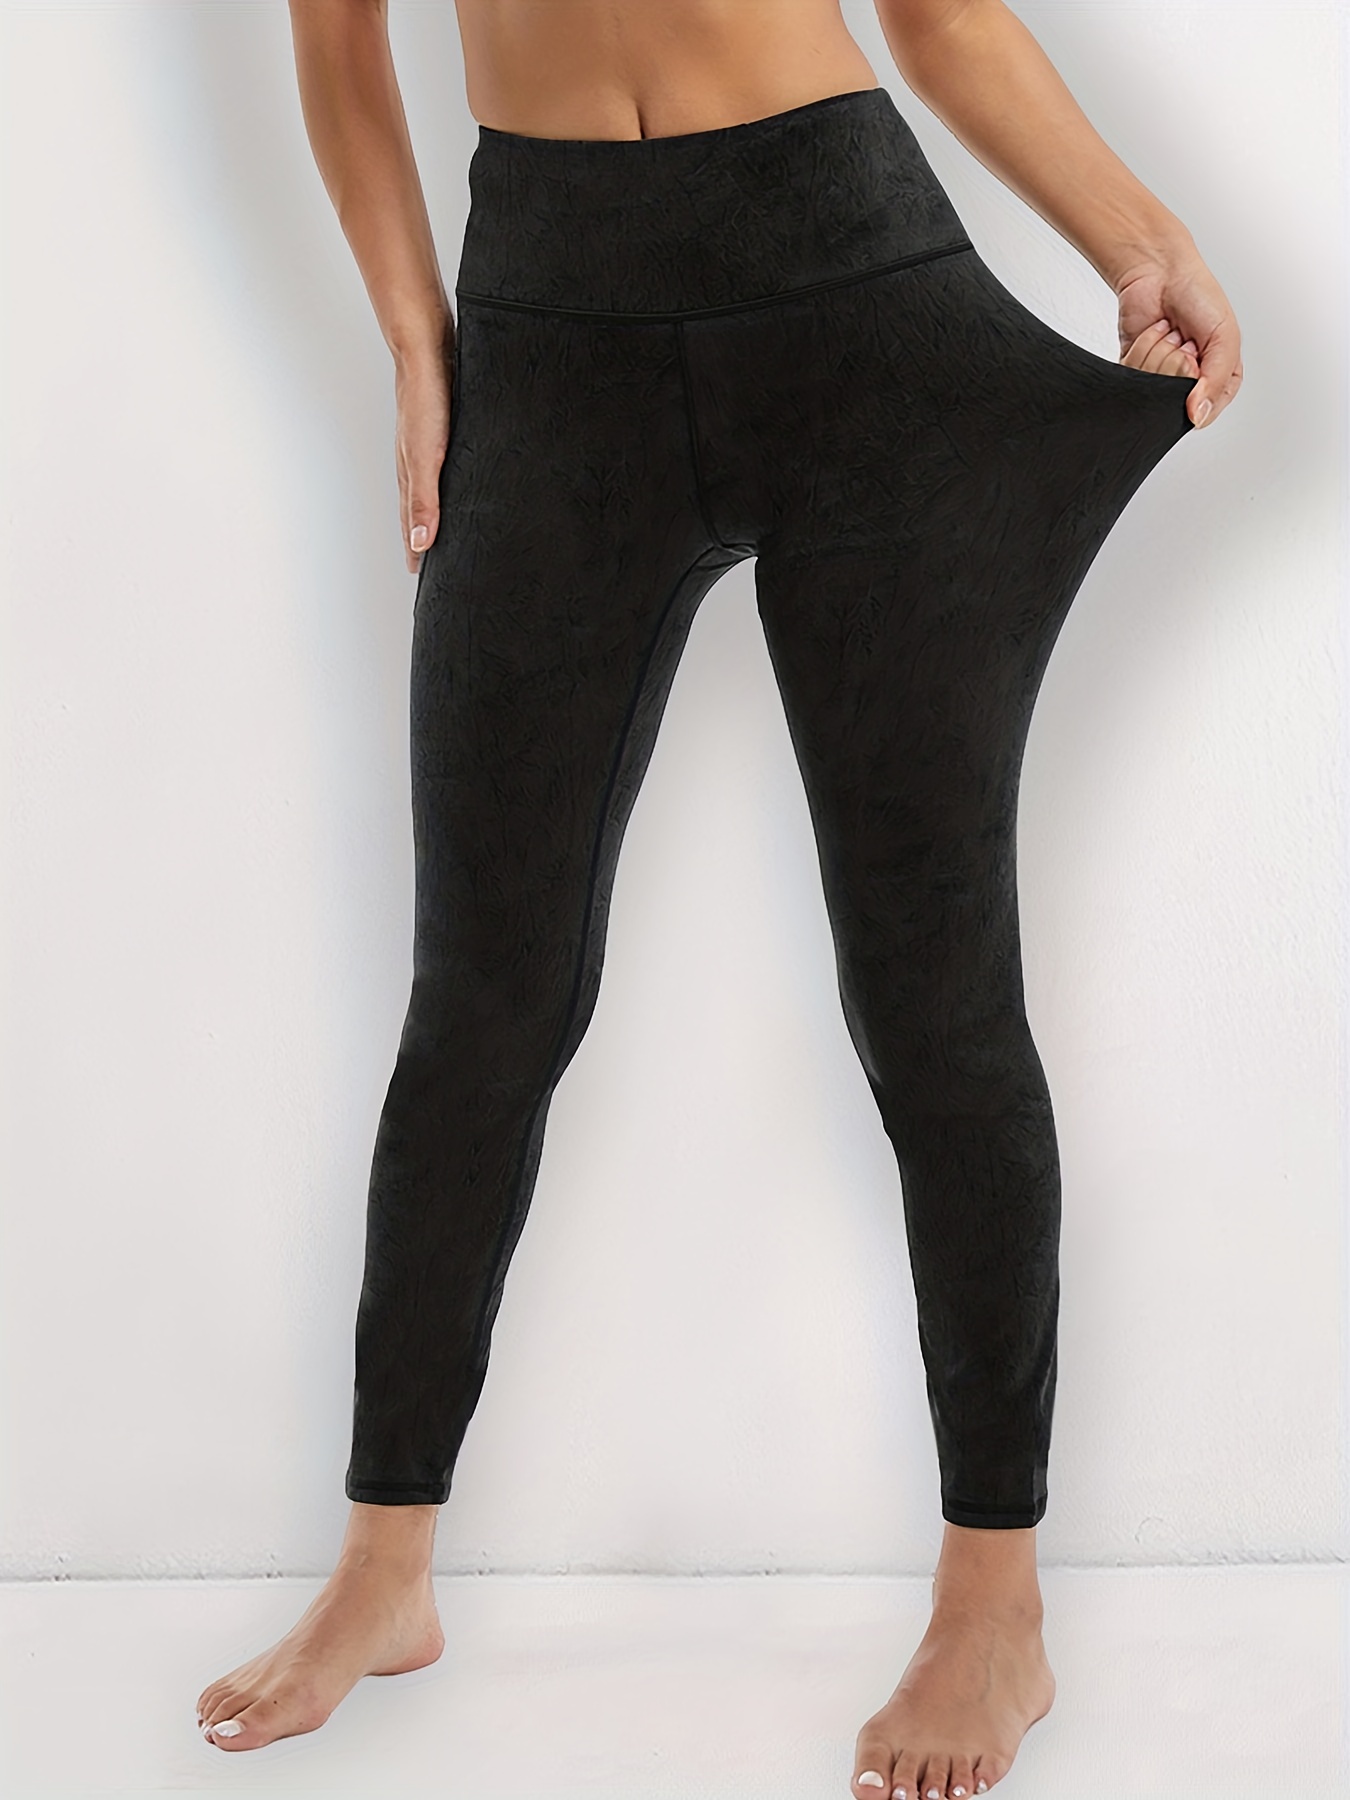 TLF Fitness Sport and Fitness Hip Stretch Nine Leggings